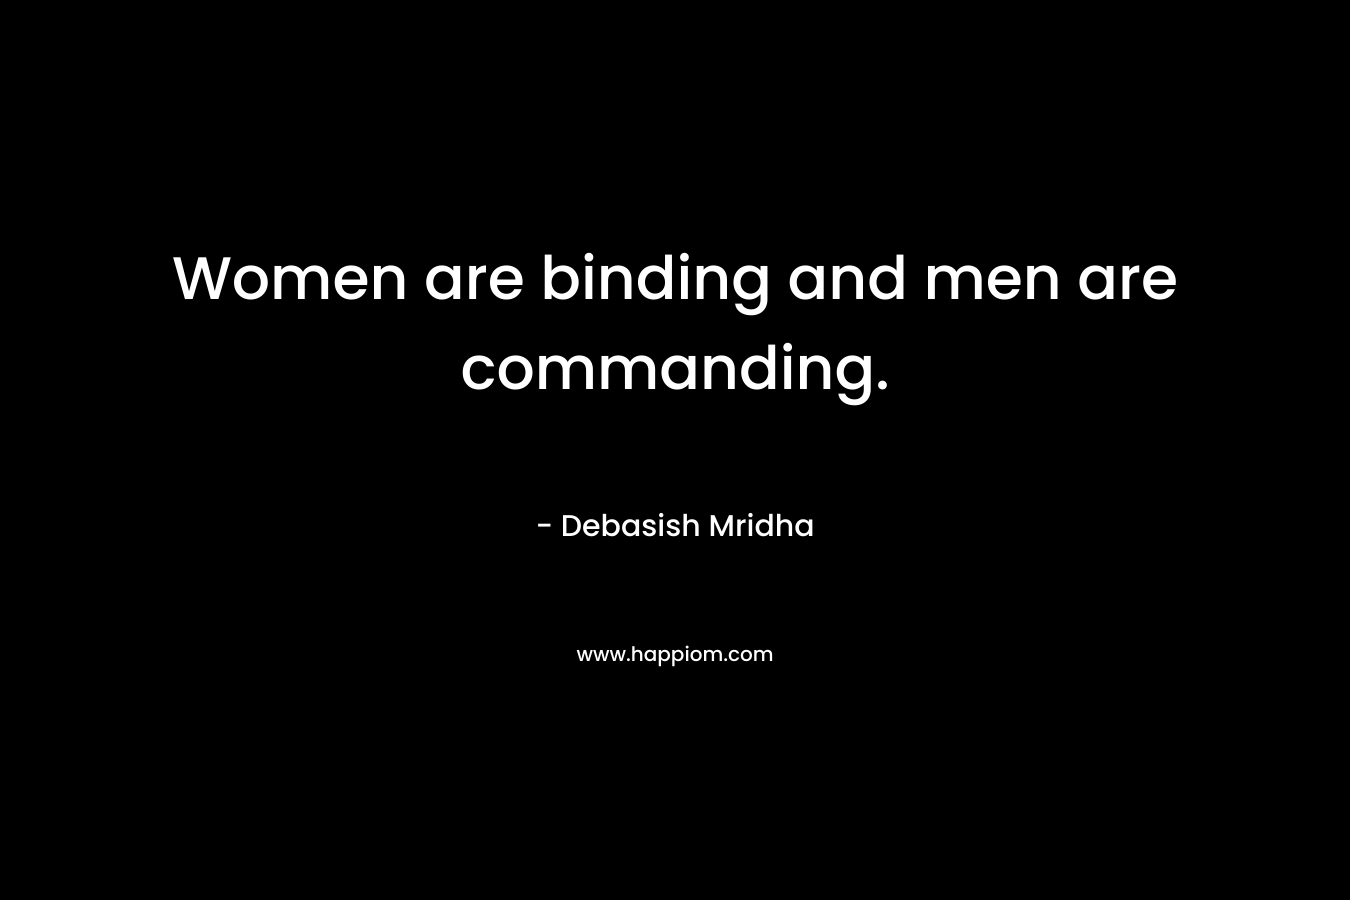 Women are binding and men are commanding.